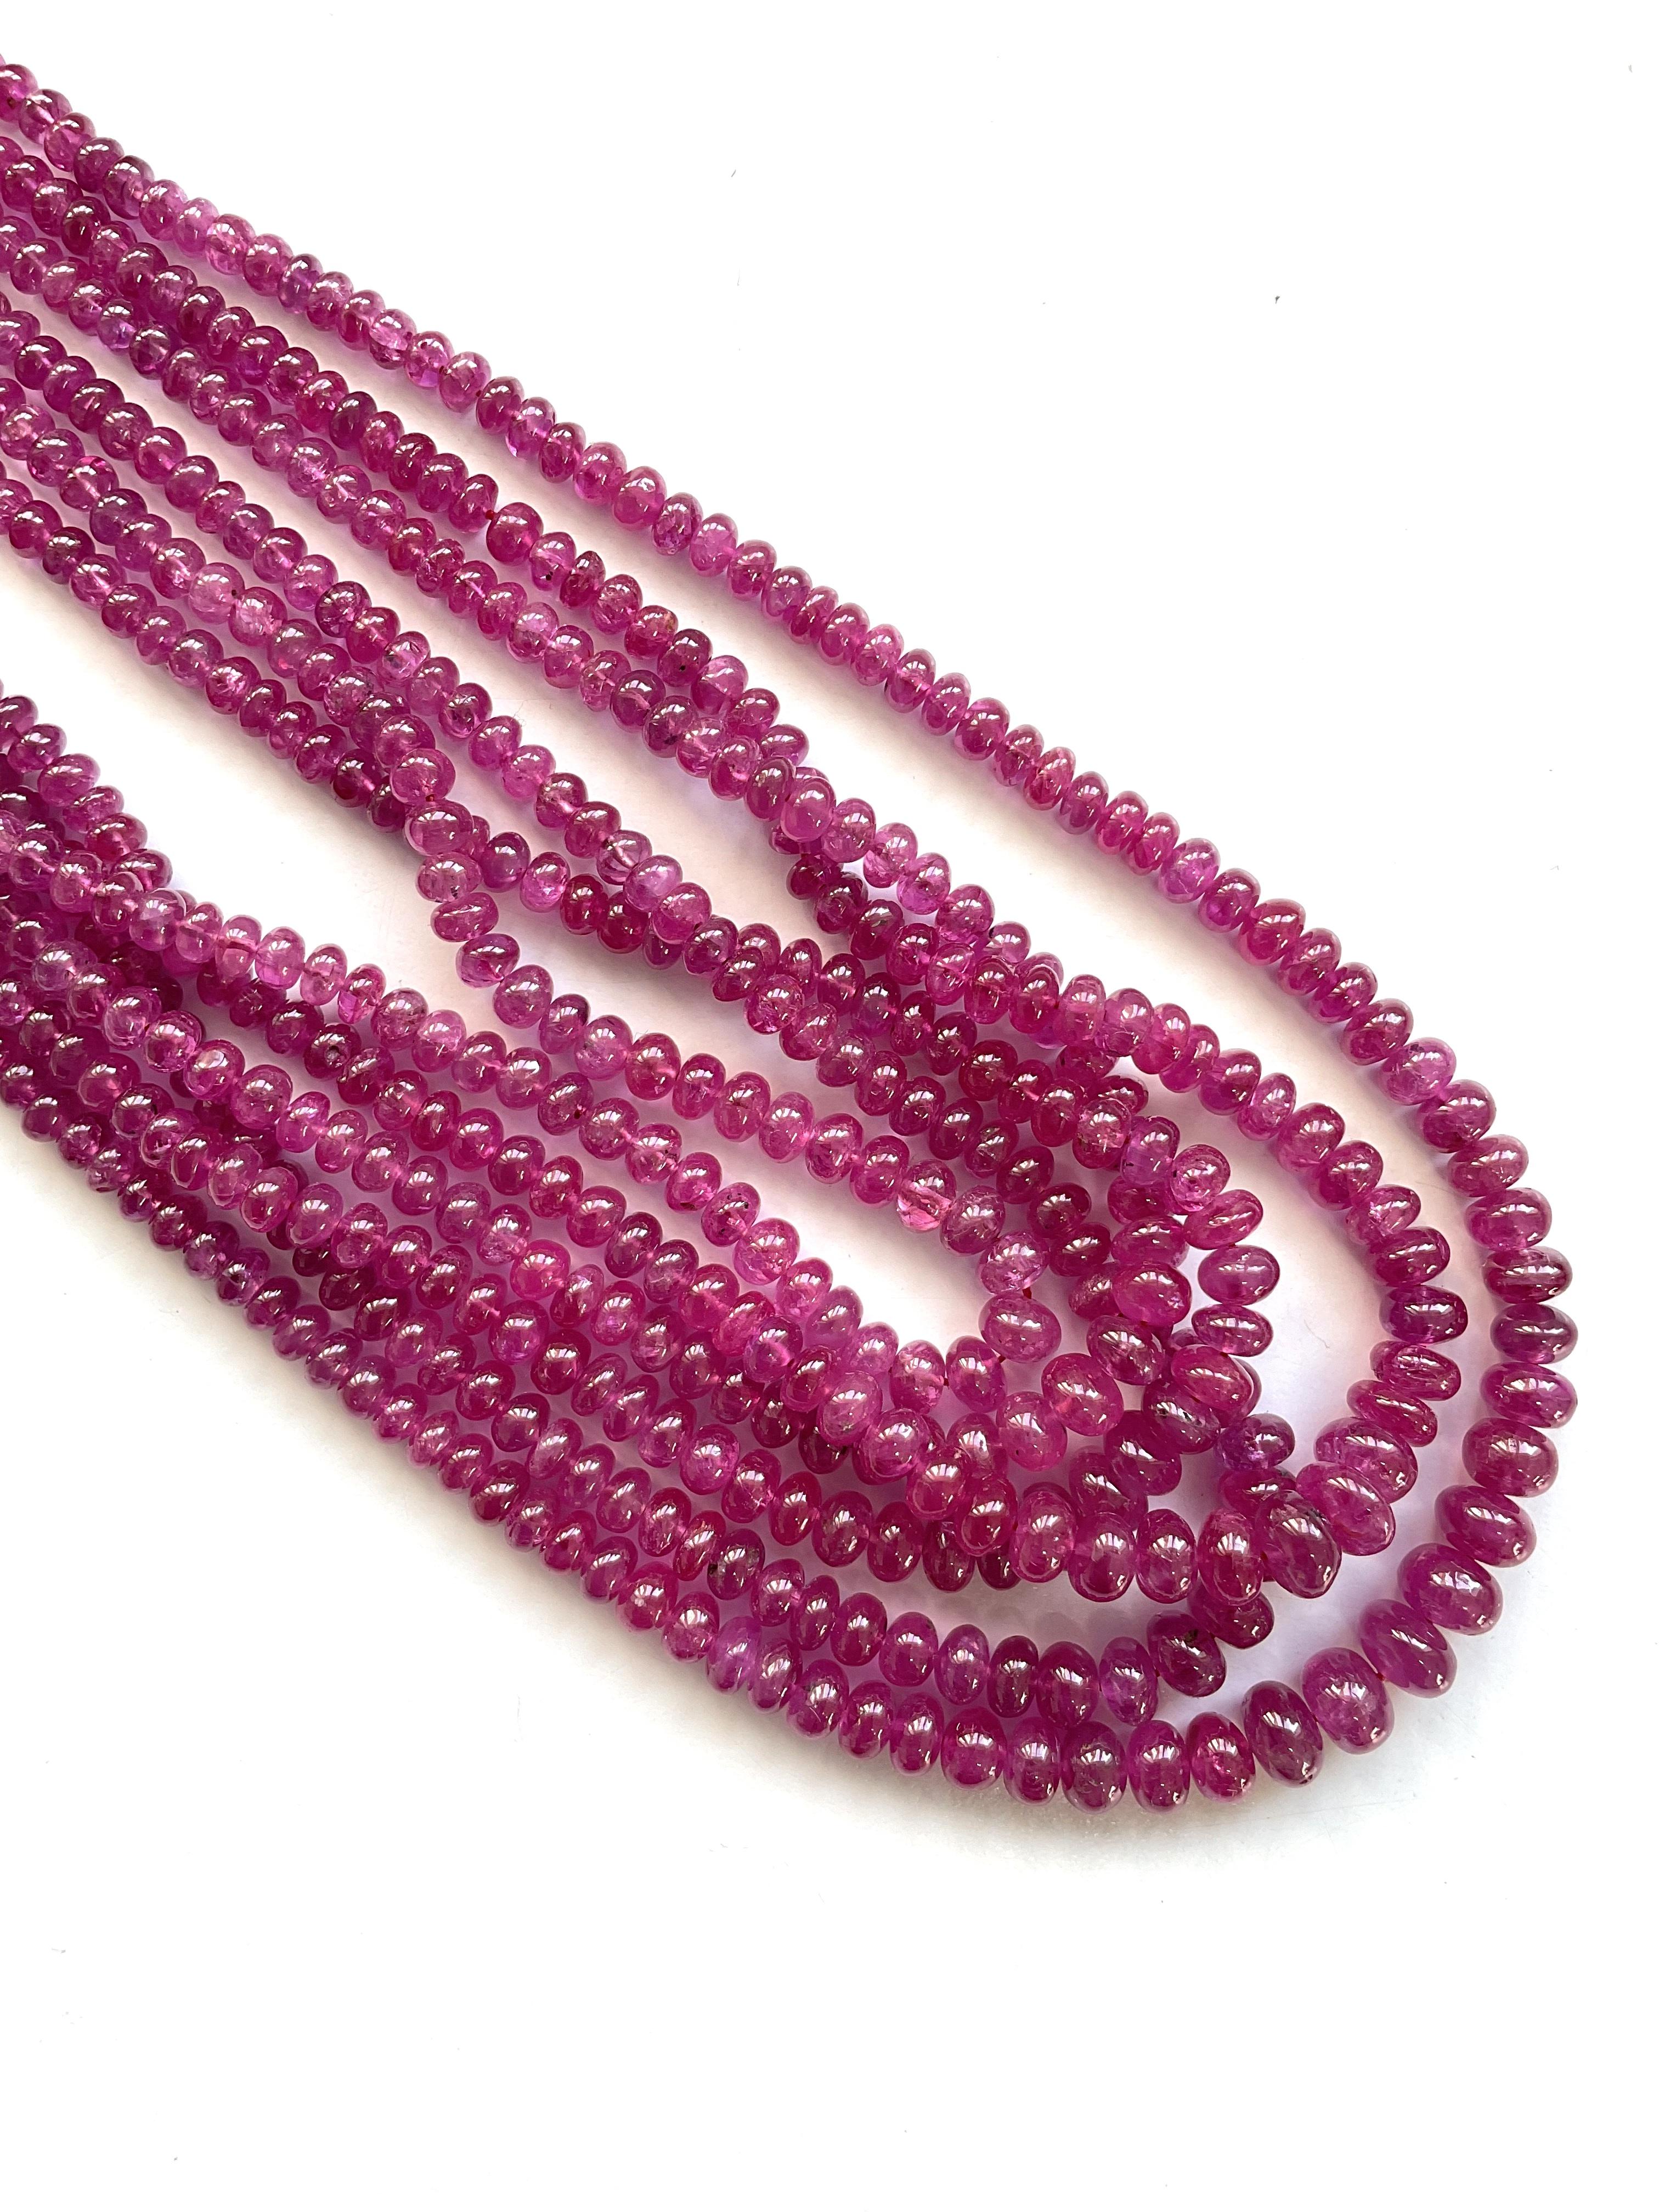 Women's or Men's Certified 620.66 Carats Burma Ruby Top Quality Beads For Jewellery Natural Gems For Sale